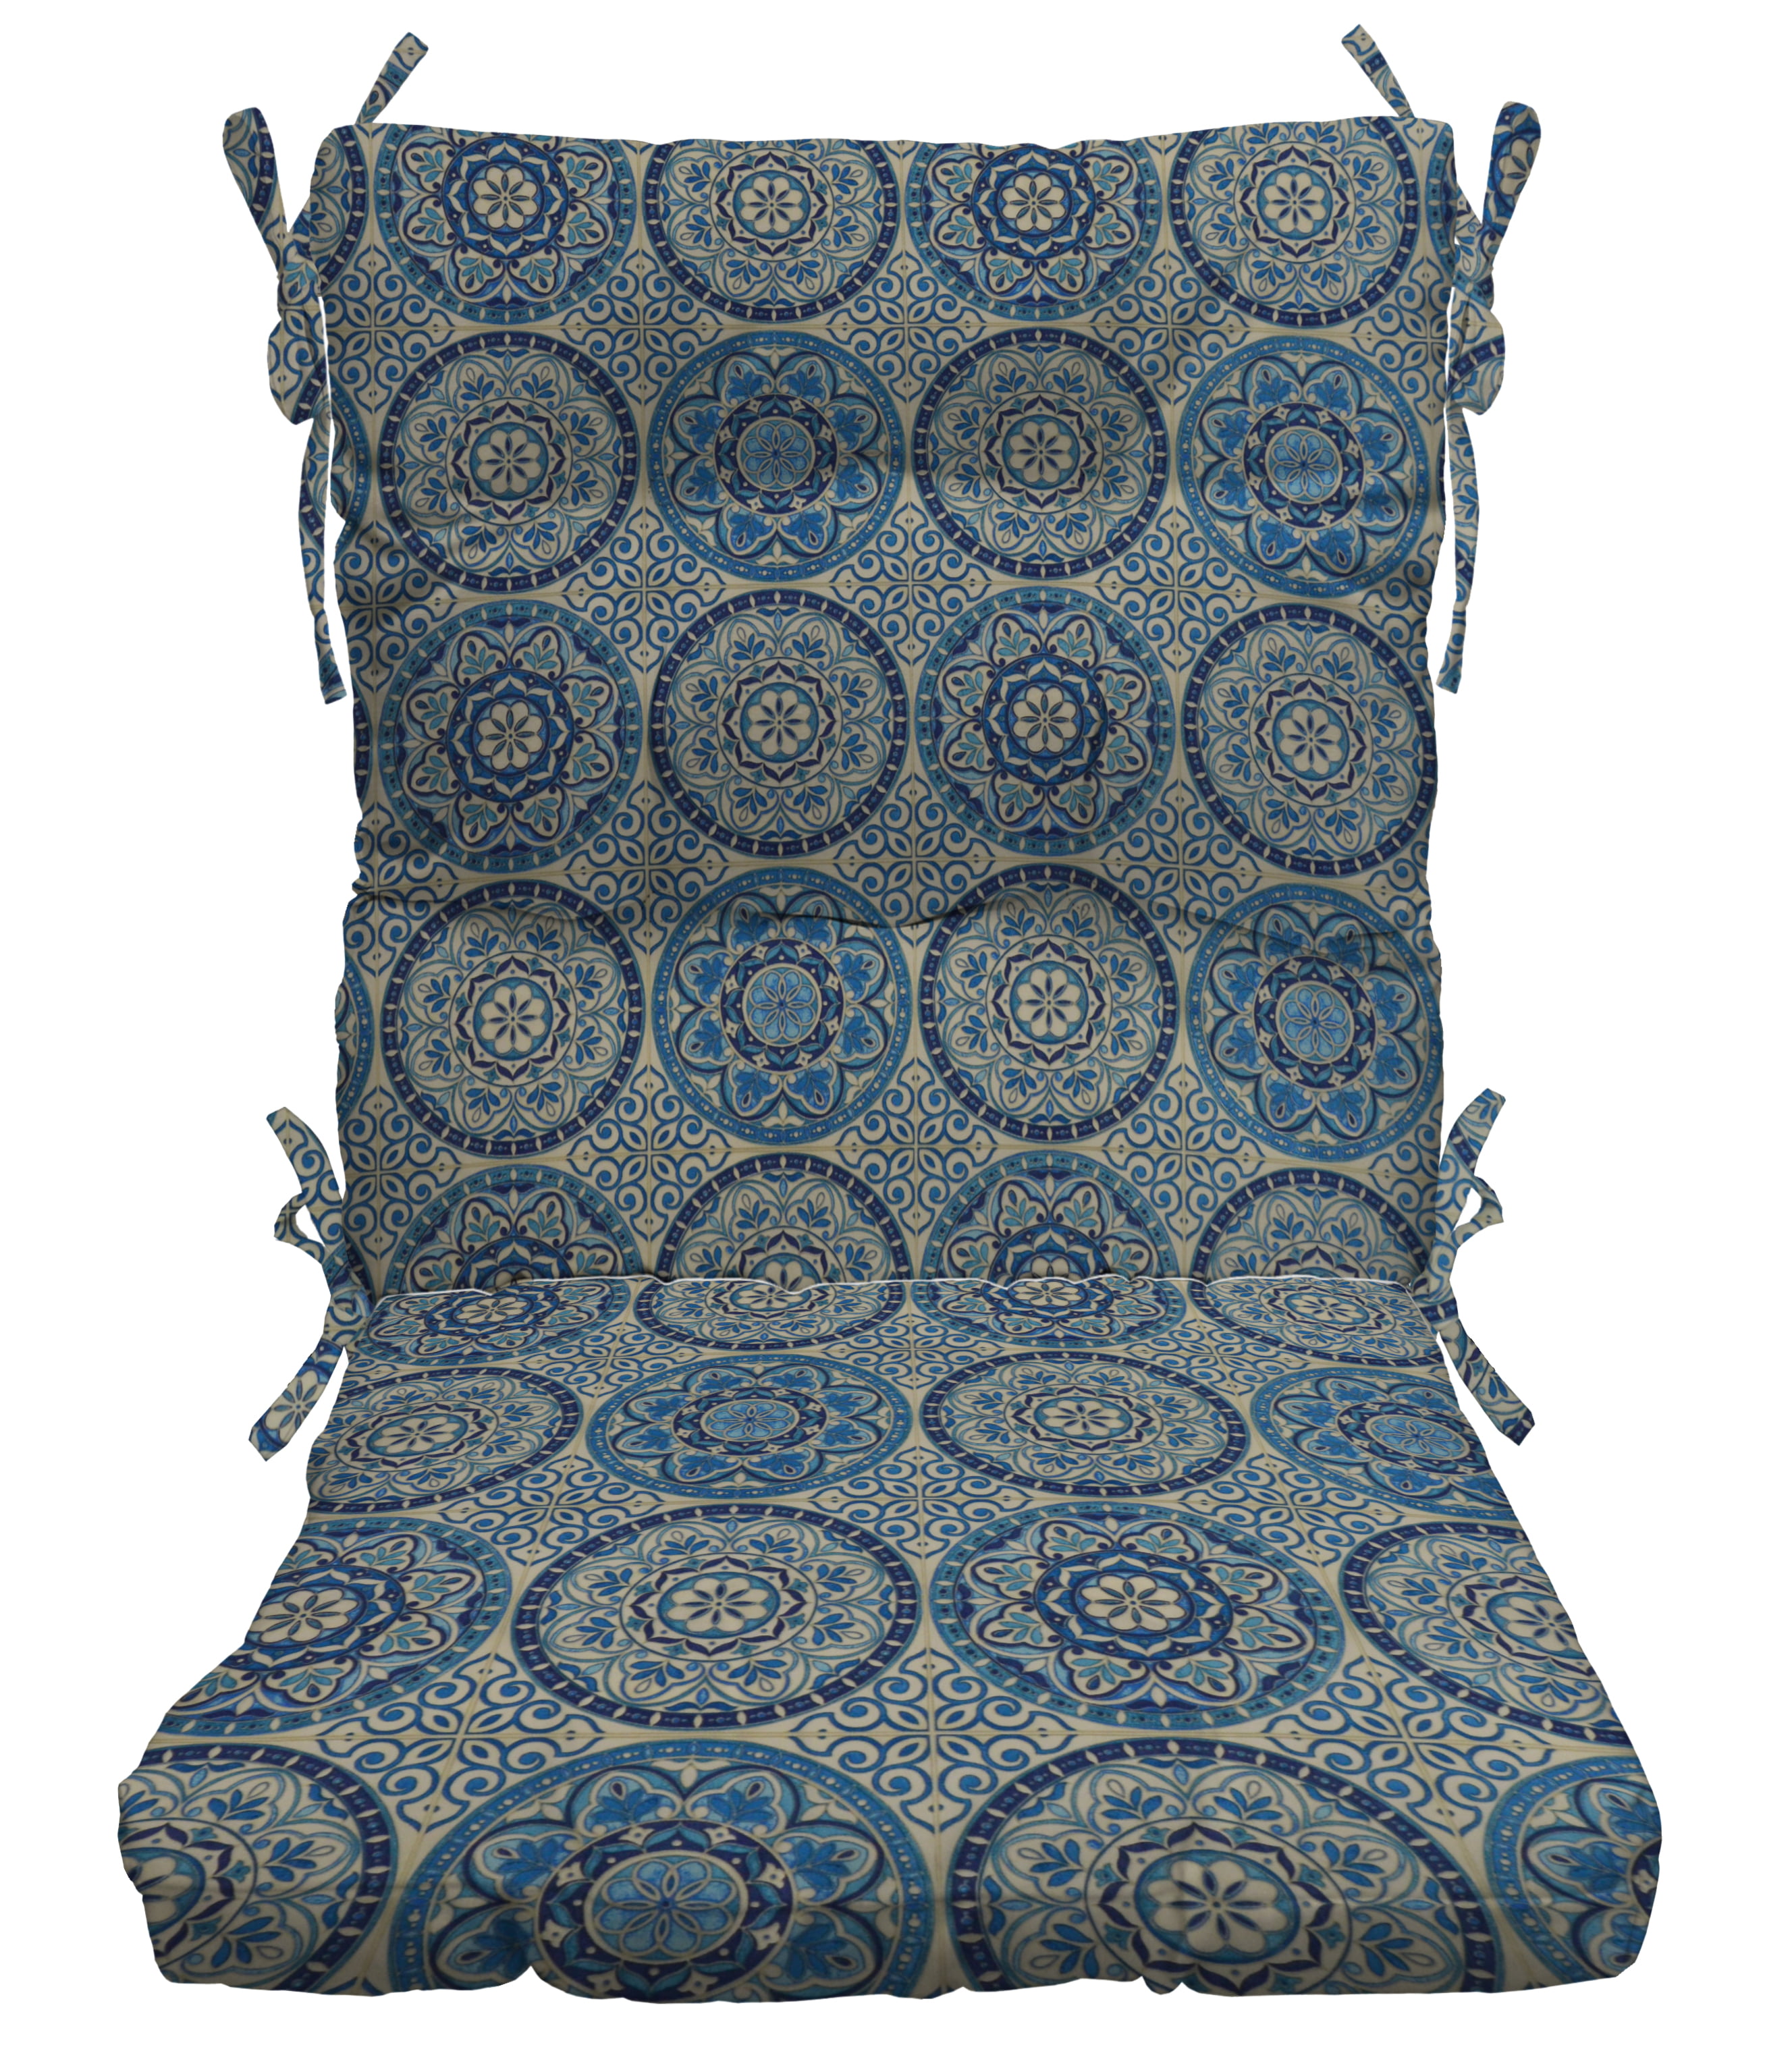 Wheel Indigo - Blue, Ivory Large Sundial Weather Resistant ~ Blue Print Patterns 41 Lx19 D RSH Décor Indoor Outdoor 3 Piece Tufted Wicker Settee Cushions 1 Loveseat 19x19 2 U-Shape 